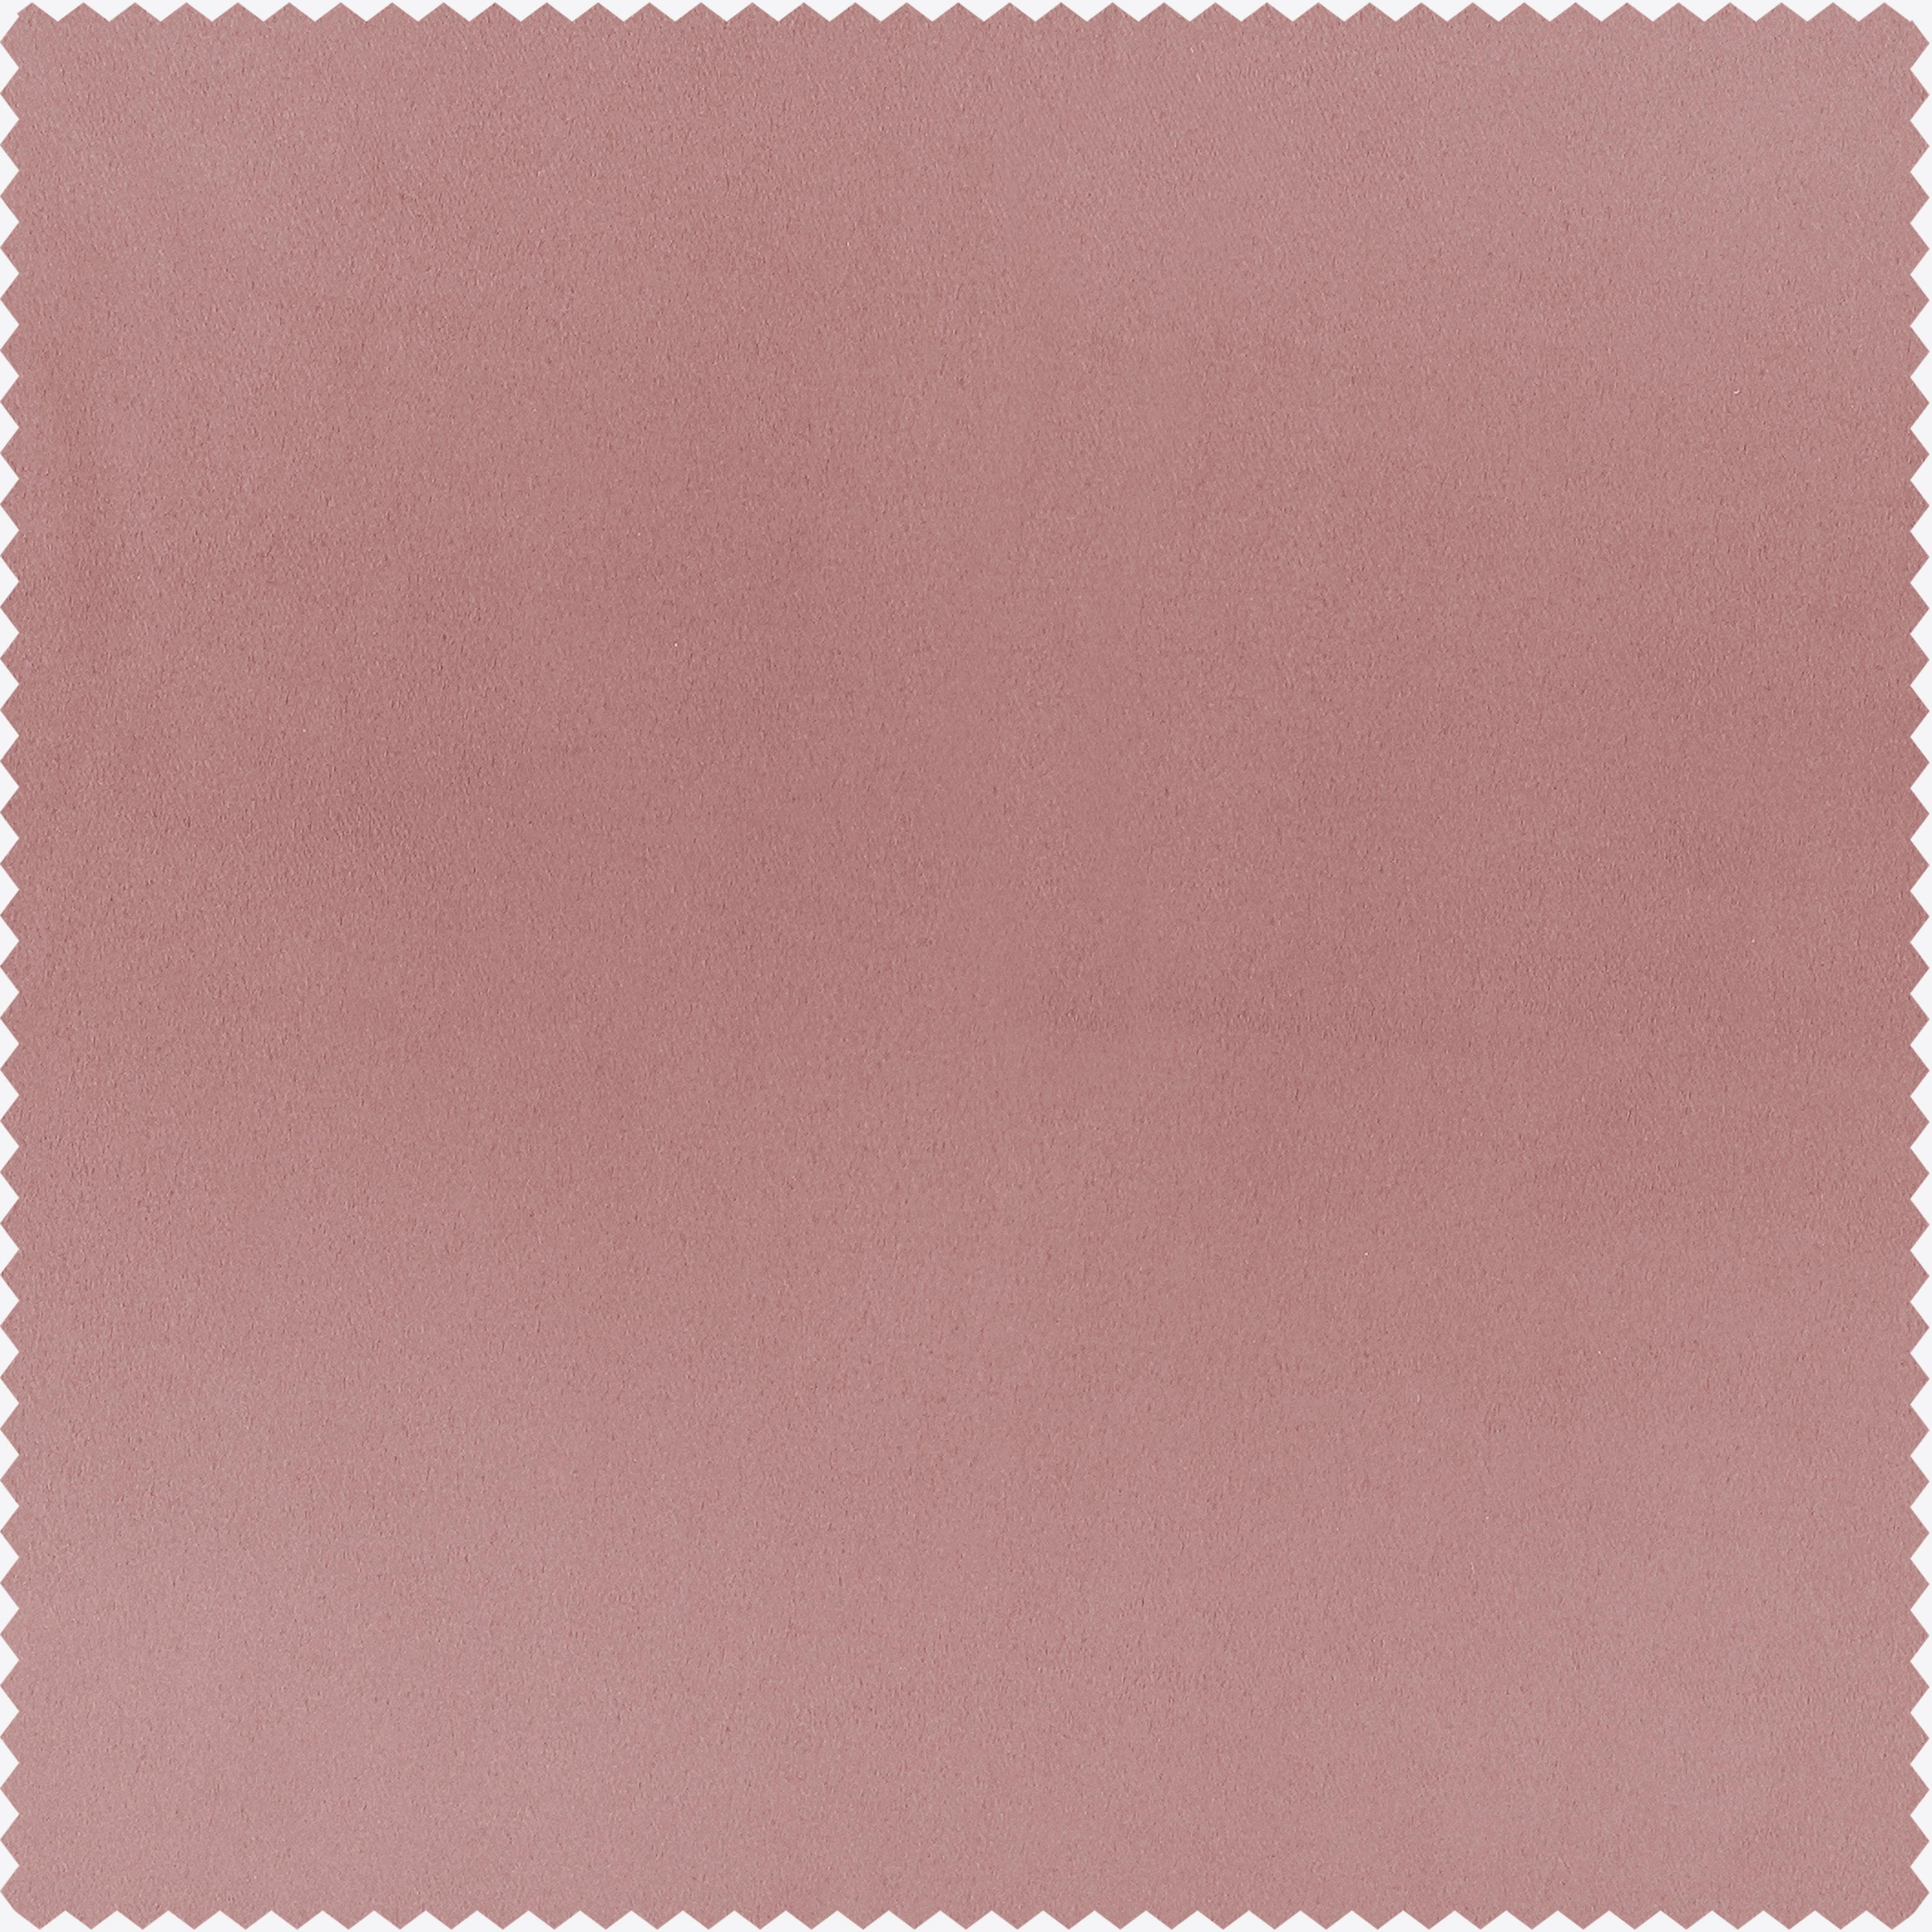 Taffy Pink Solid Polyester Swatch